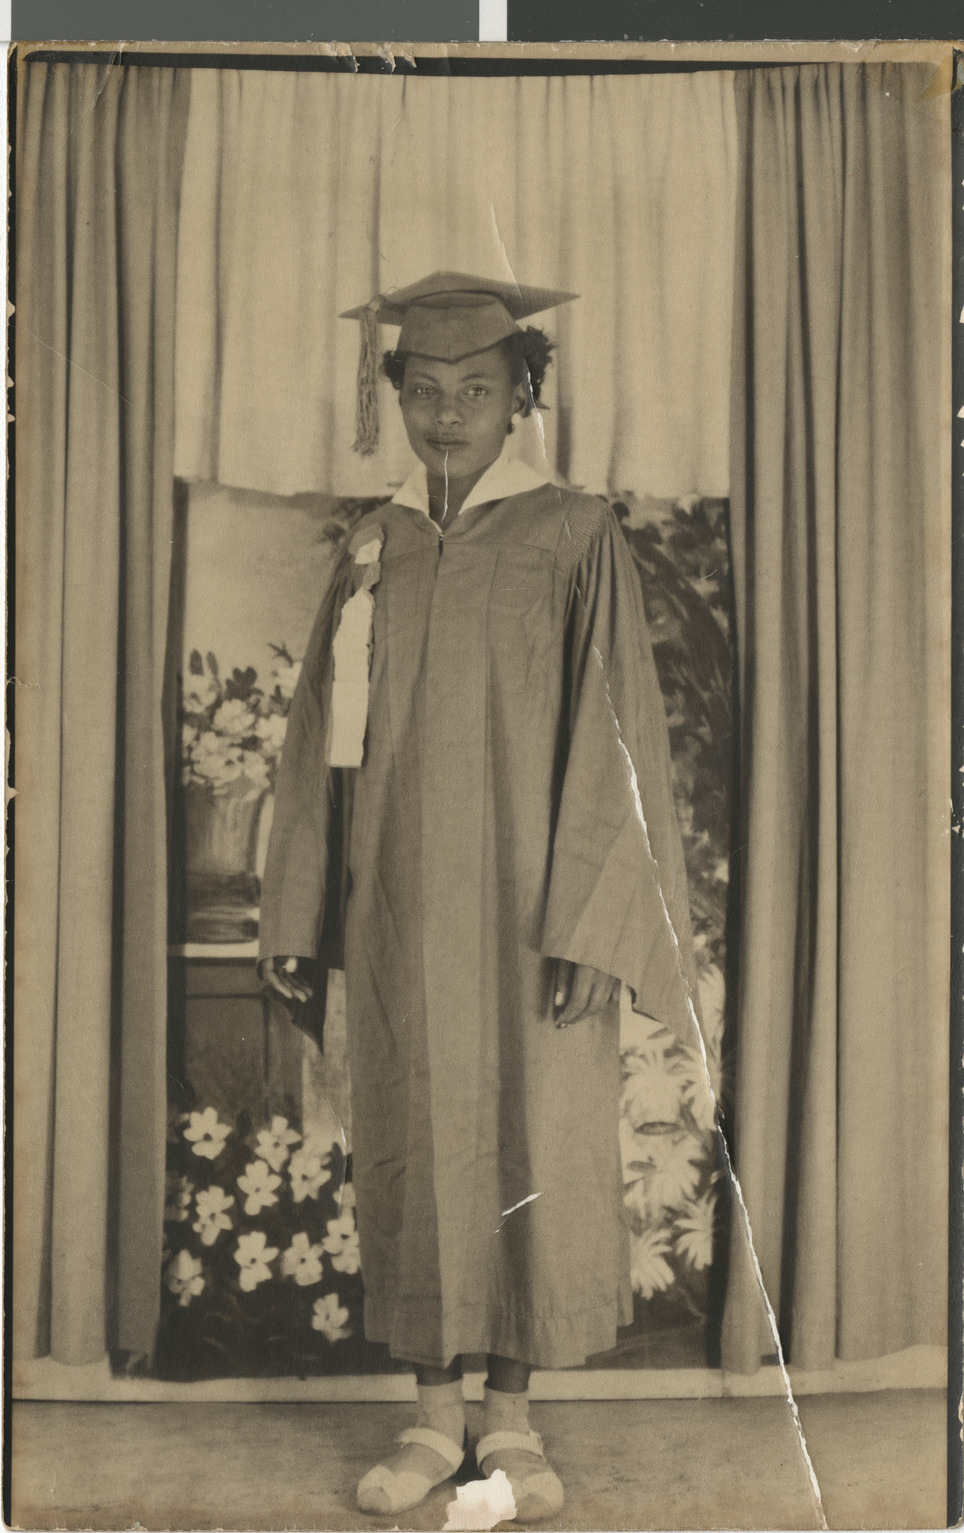 Black and white (sepia) photograph of Ruby in a graduation cap and gown, 1949